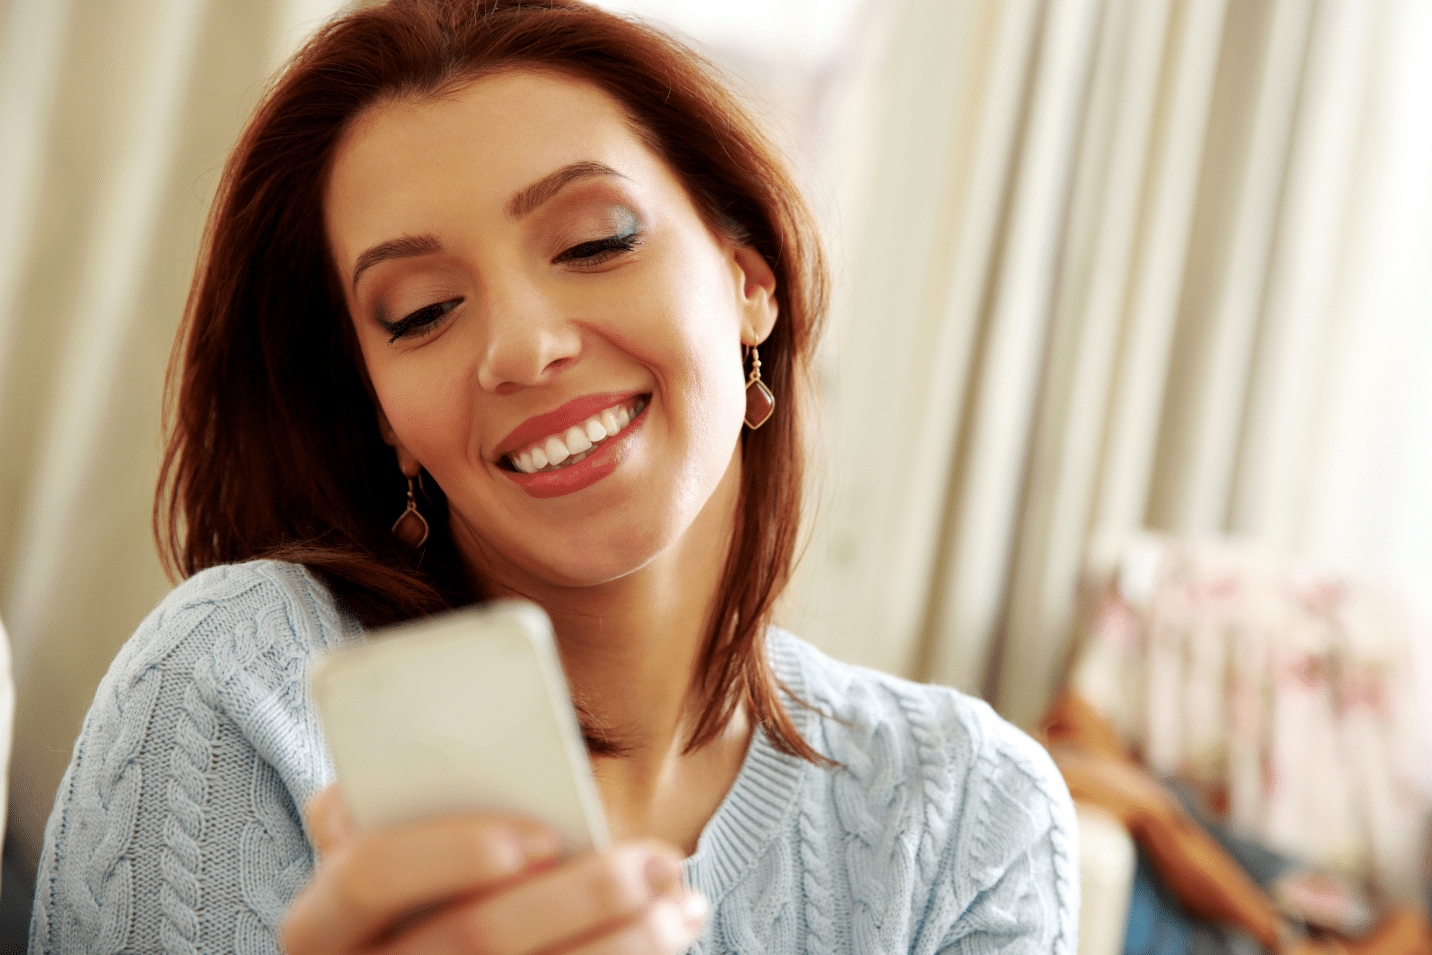 smiling-woman-holding-smartphone-at-home-SBI-300855287 1